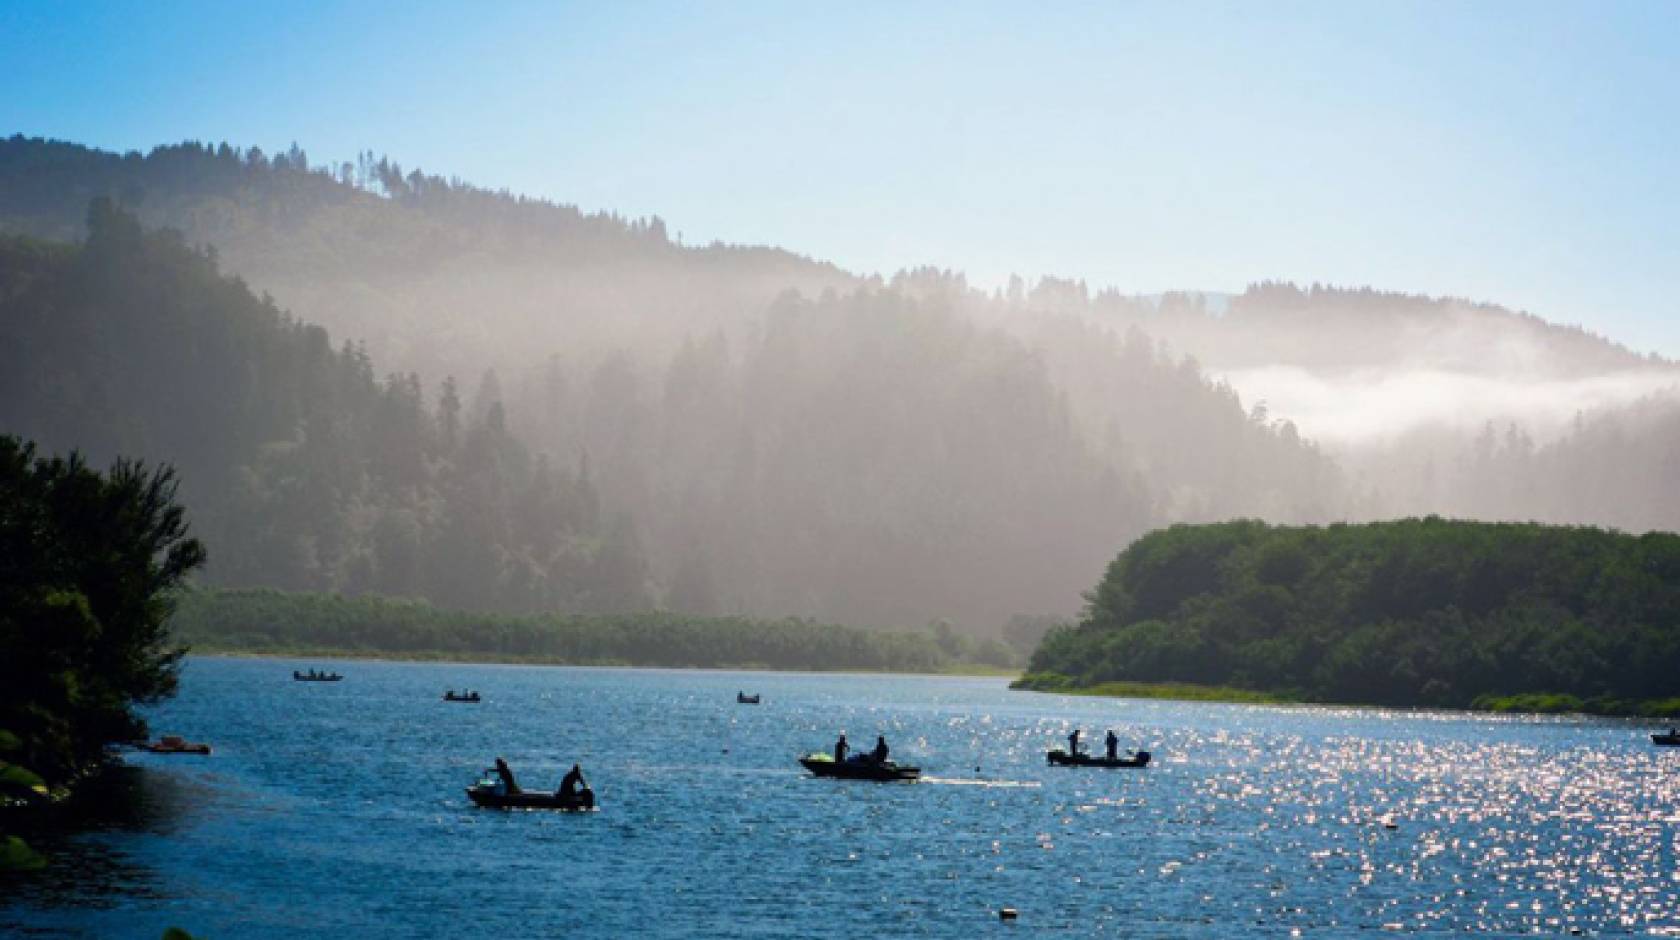 Small boats in the Klamath River, 2019